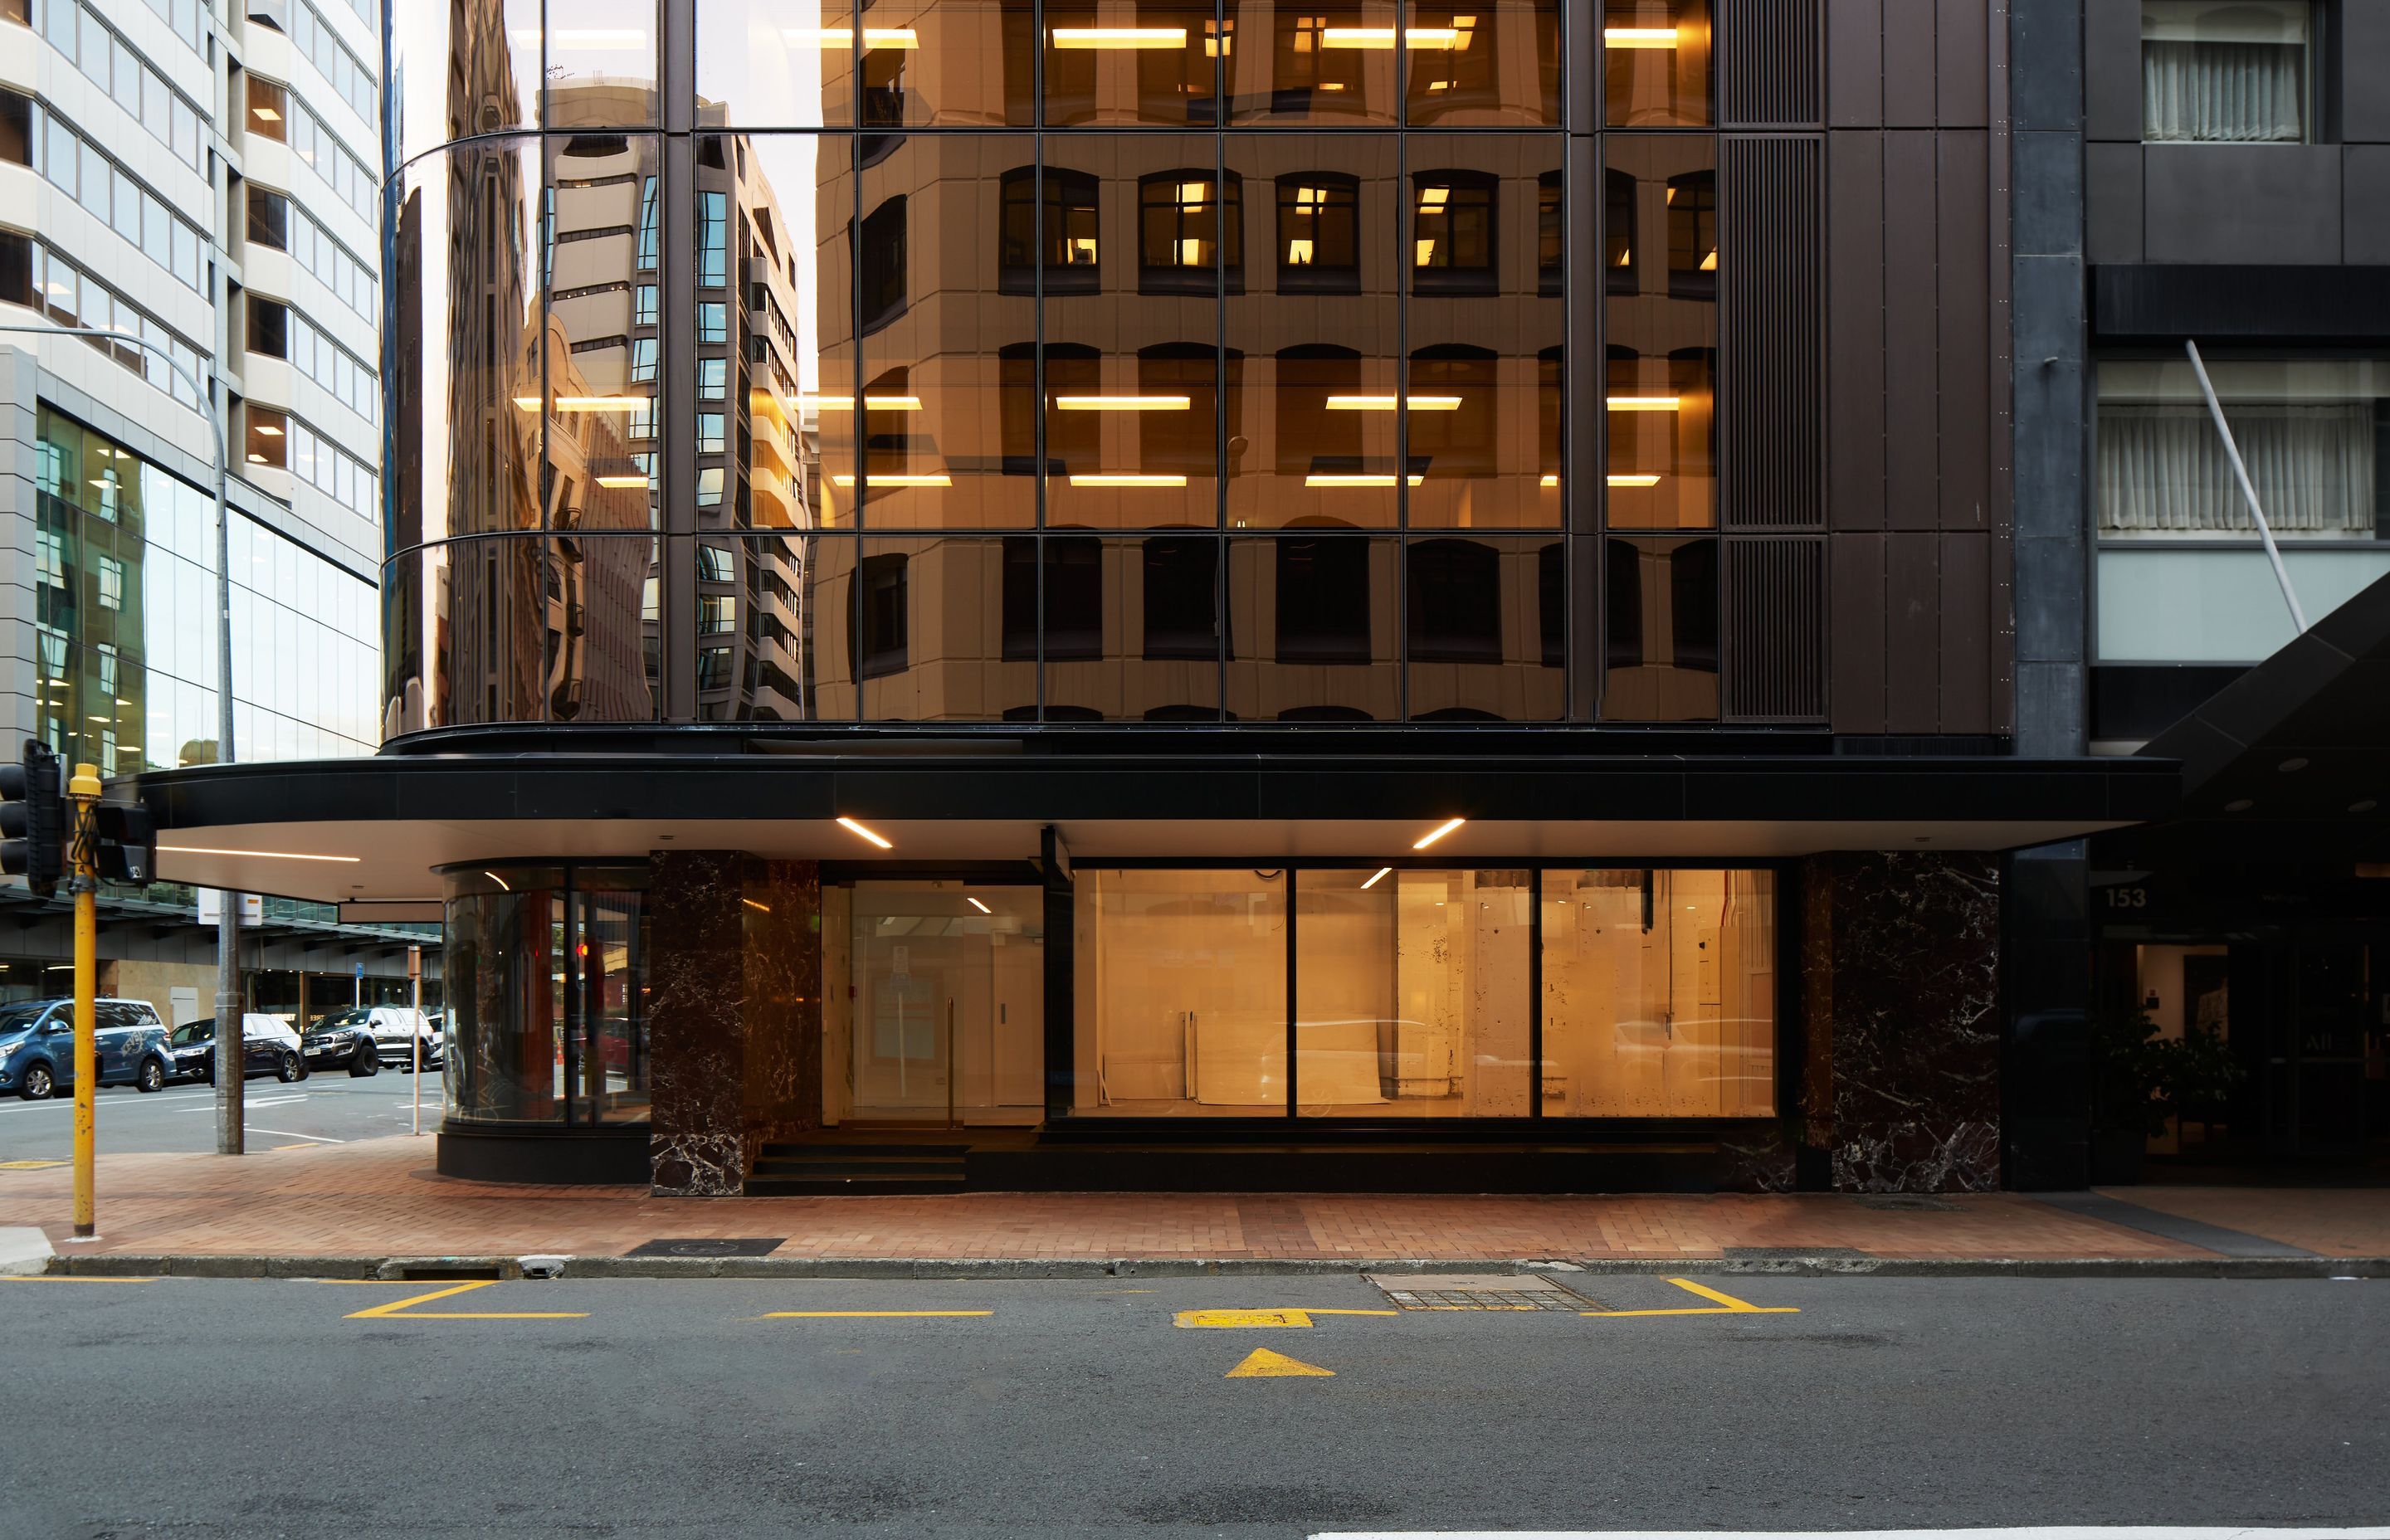  The ground floor of the building includes infrastructure for retail or hospitality. “There is a small area for retail on the corner, which is one structural bay and the curve, and then that continues on. All of the Featherston Street frontage is retail.”